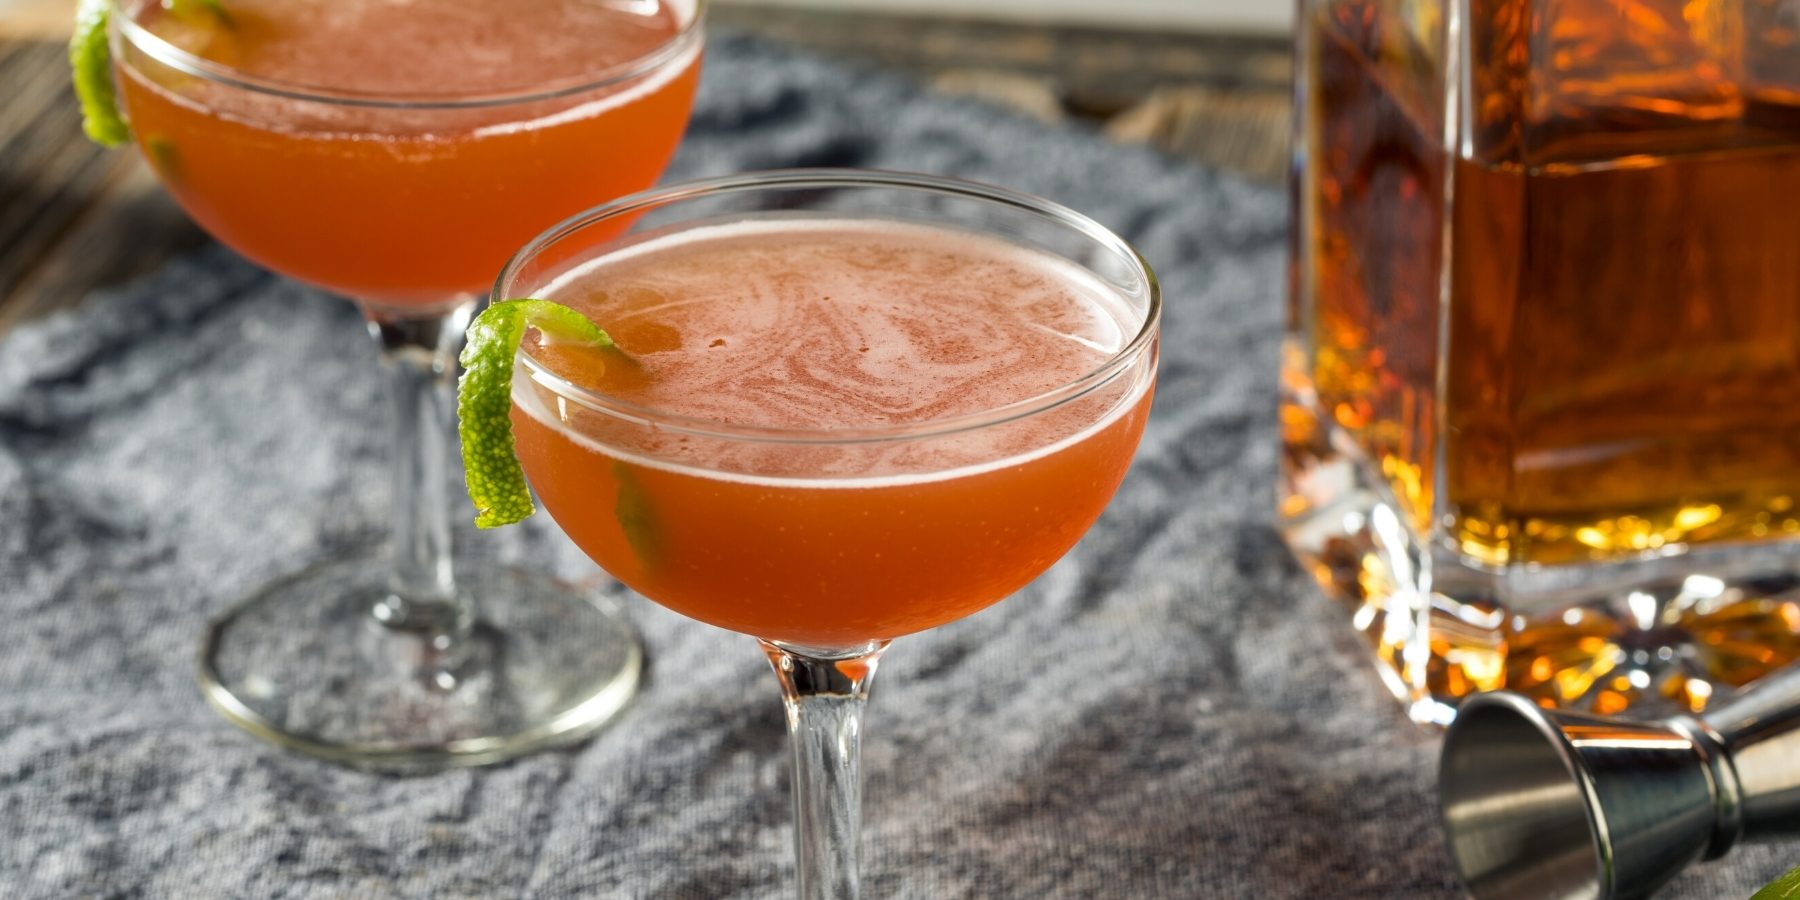 10 Best Cognac Tails To Make At